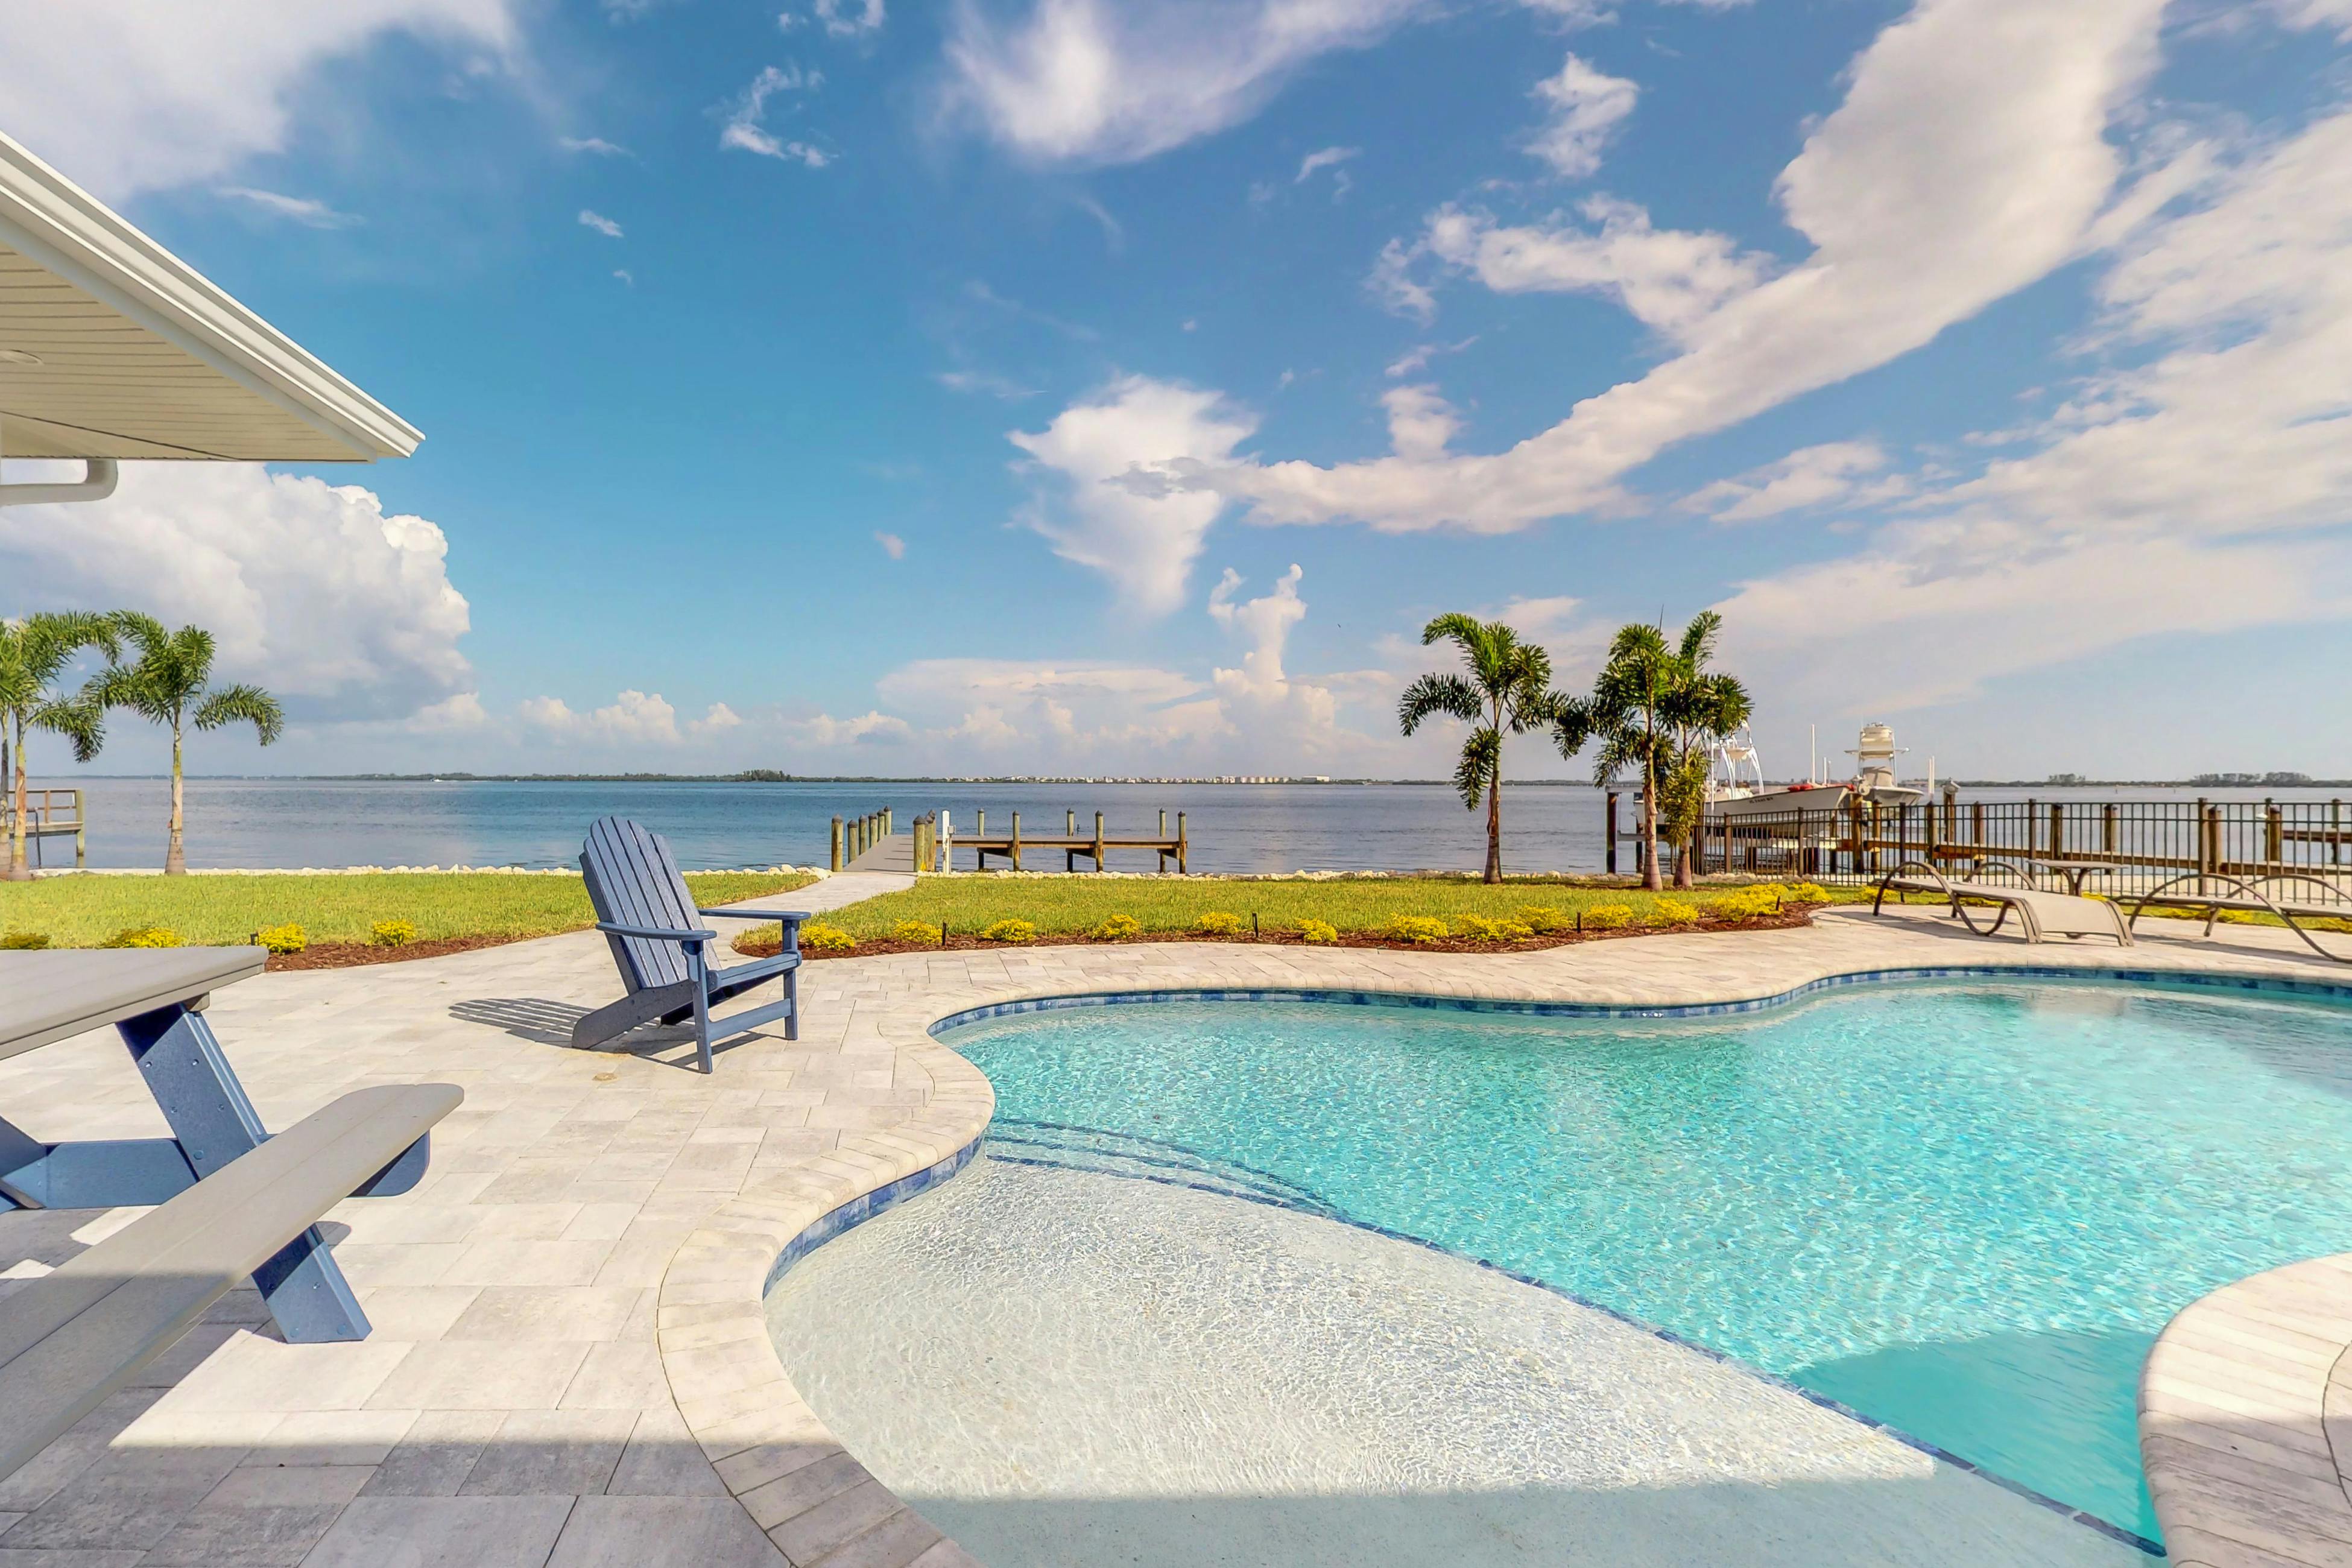 The pool and private dock overlooking the bay at a vacation rental in Holmes Beach, Florida.